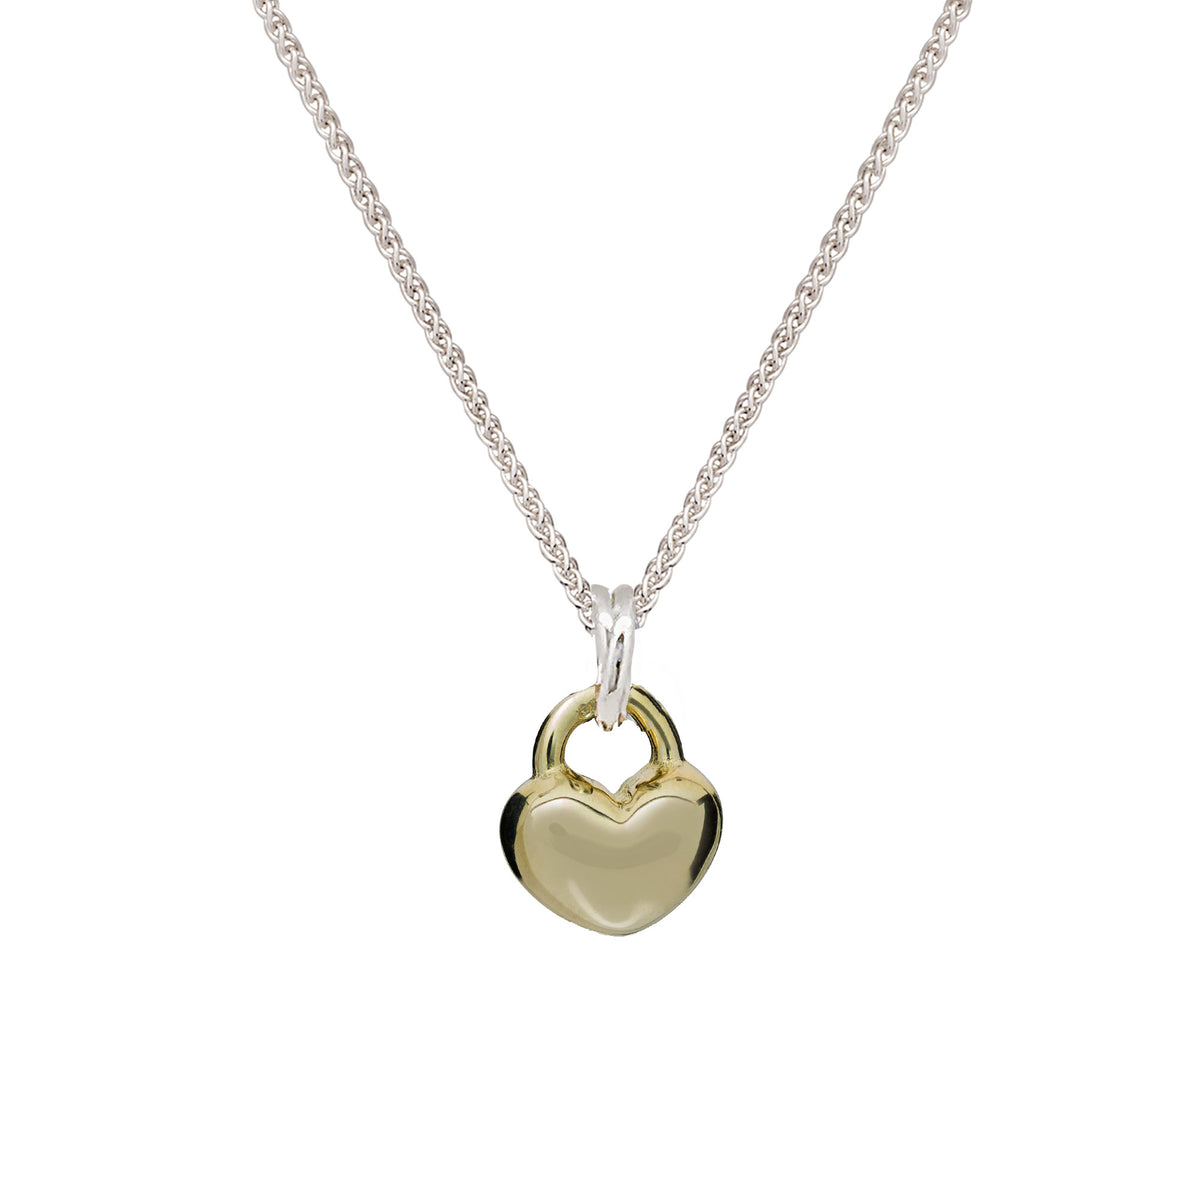 solid gold and silver love heart pendant necklace romantic anniversary gift for girlfriend wife